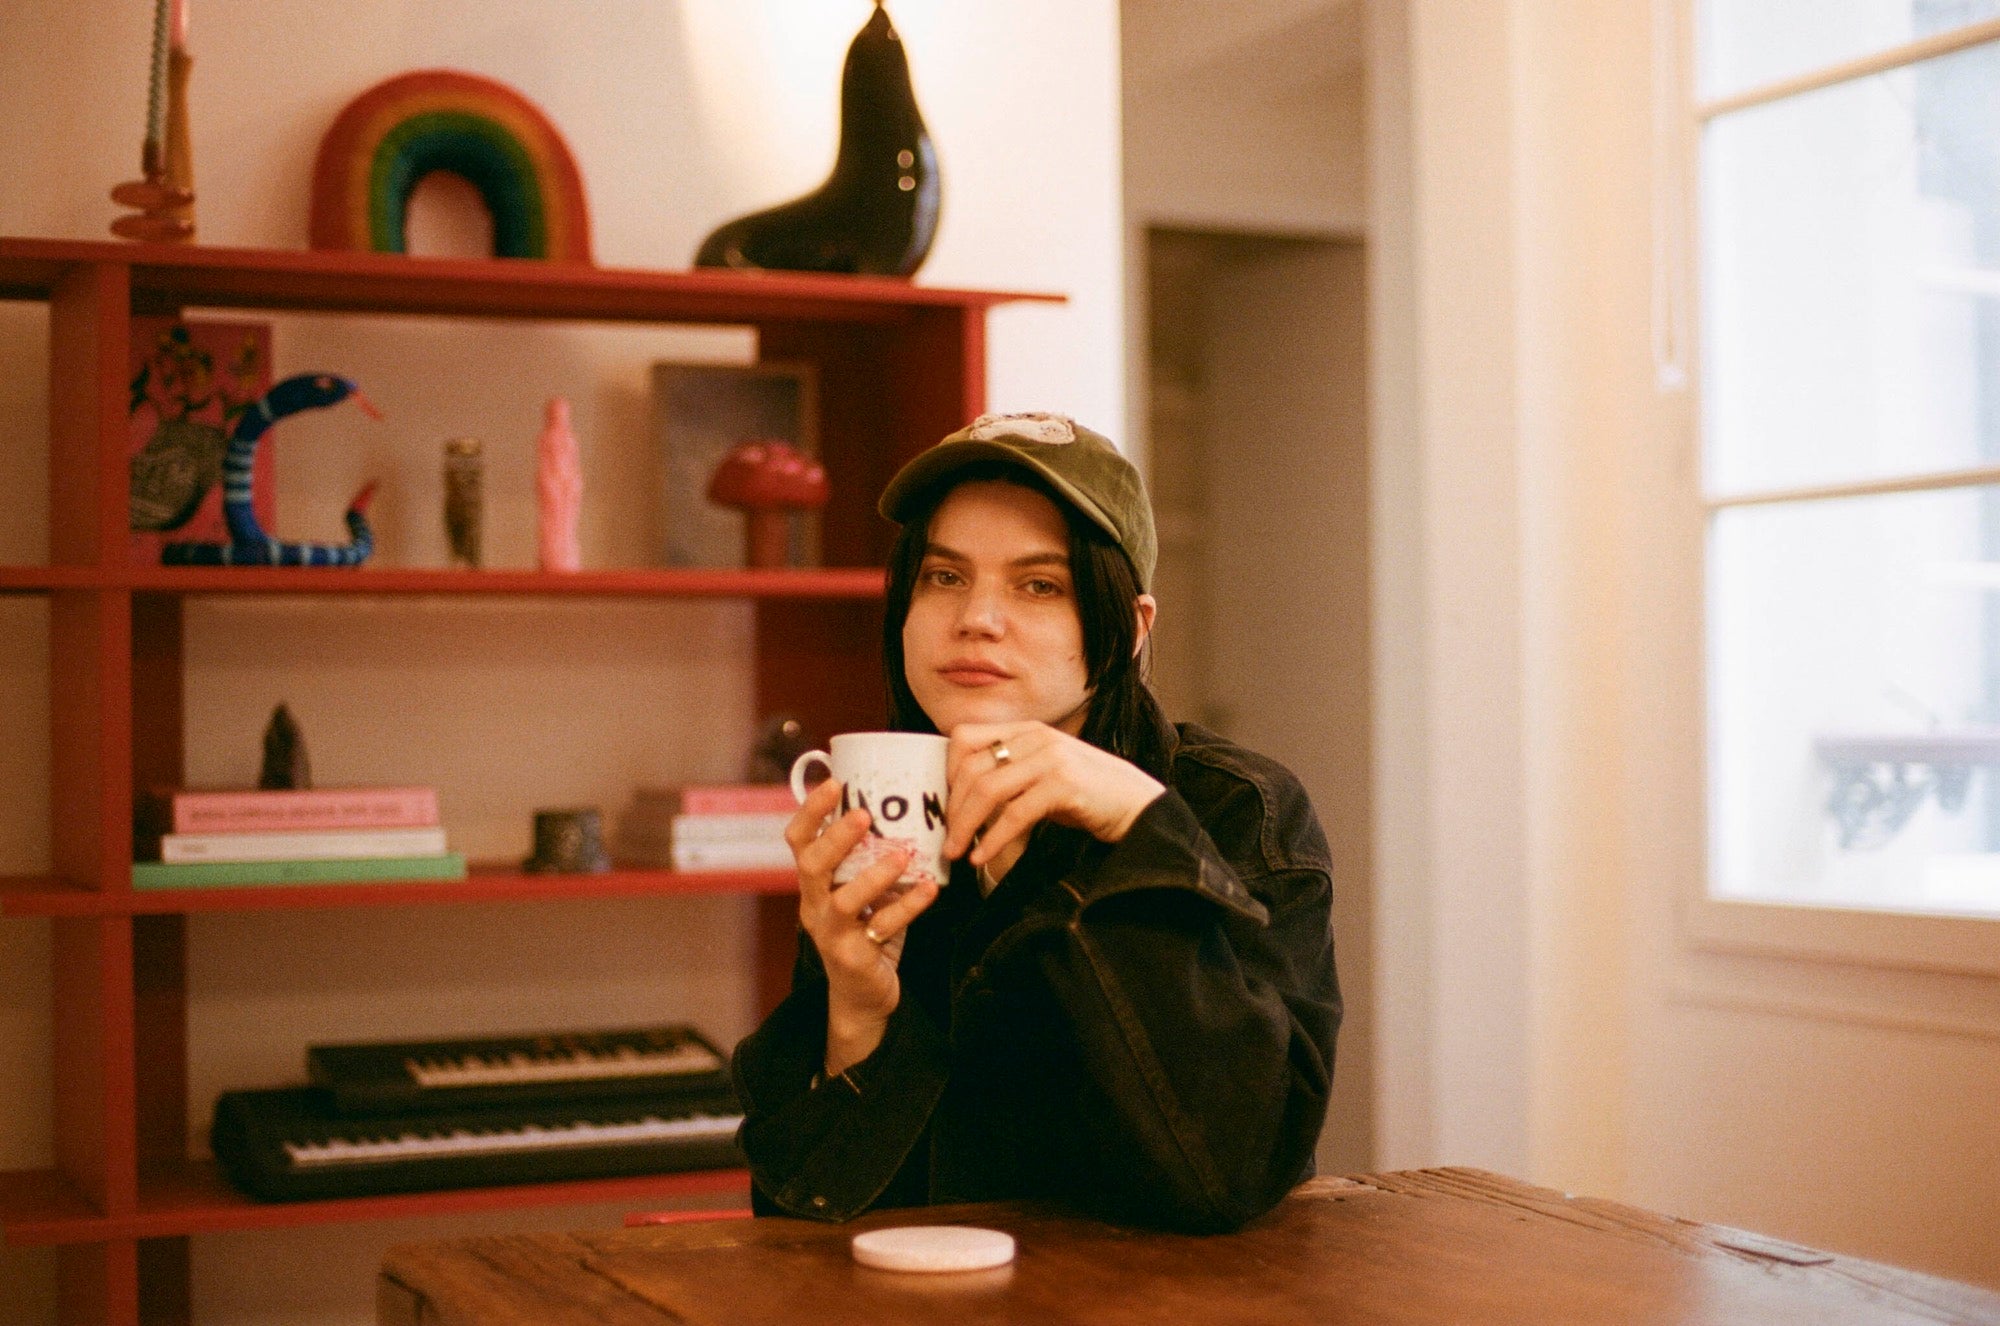 In rainbows: stepping inside Soko’s vibrant sanctuary